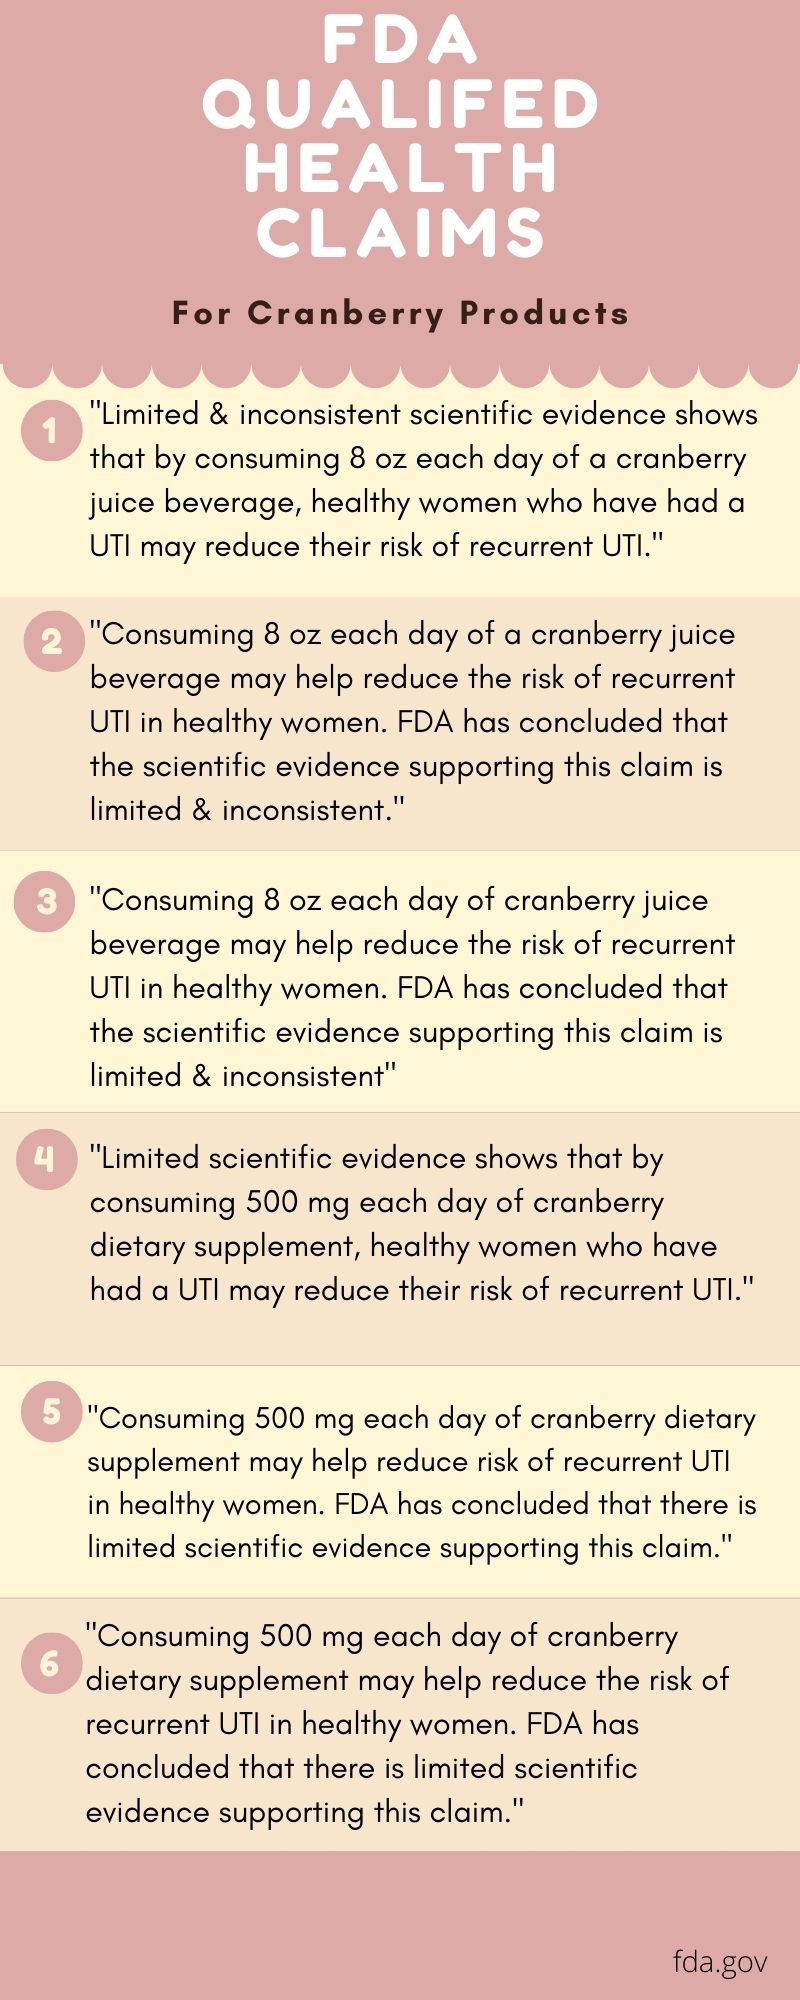 List of FDA qualifed health claims for cranberry products and urinary tract infections